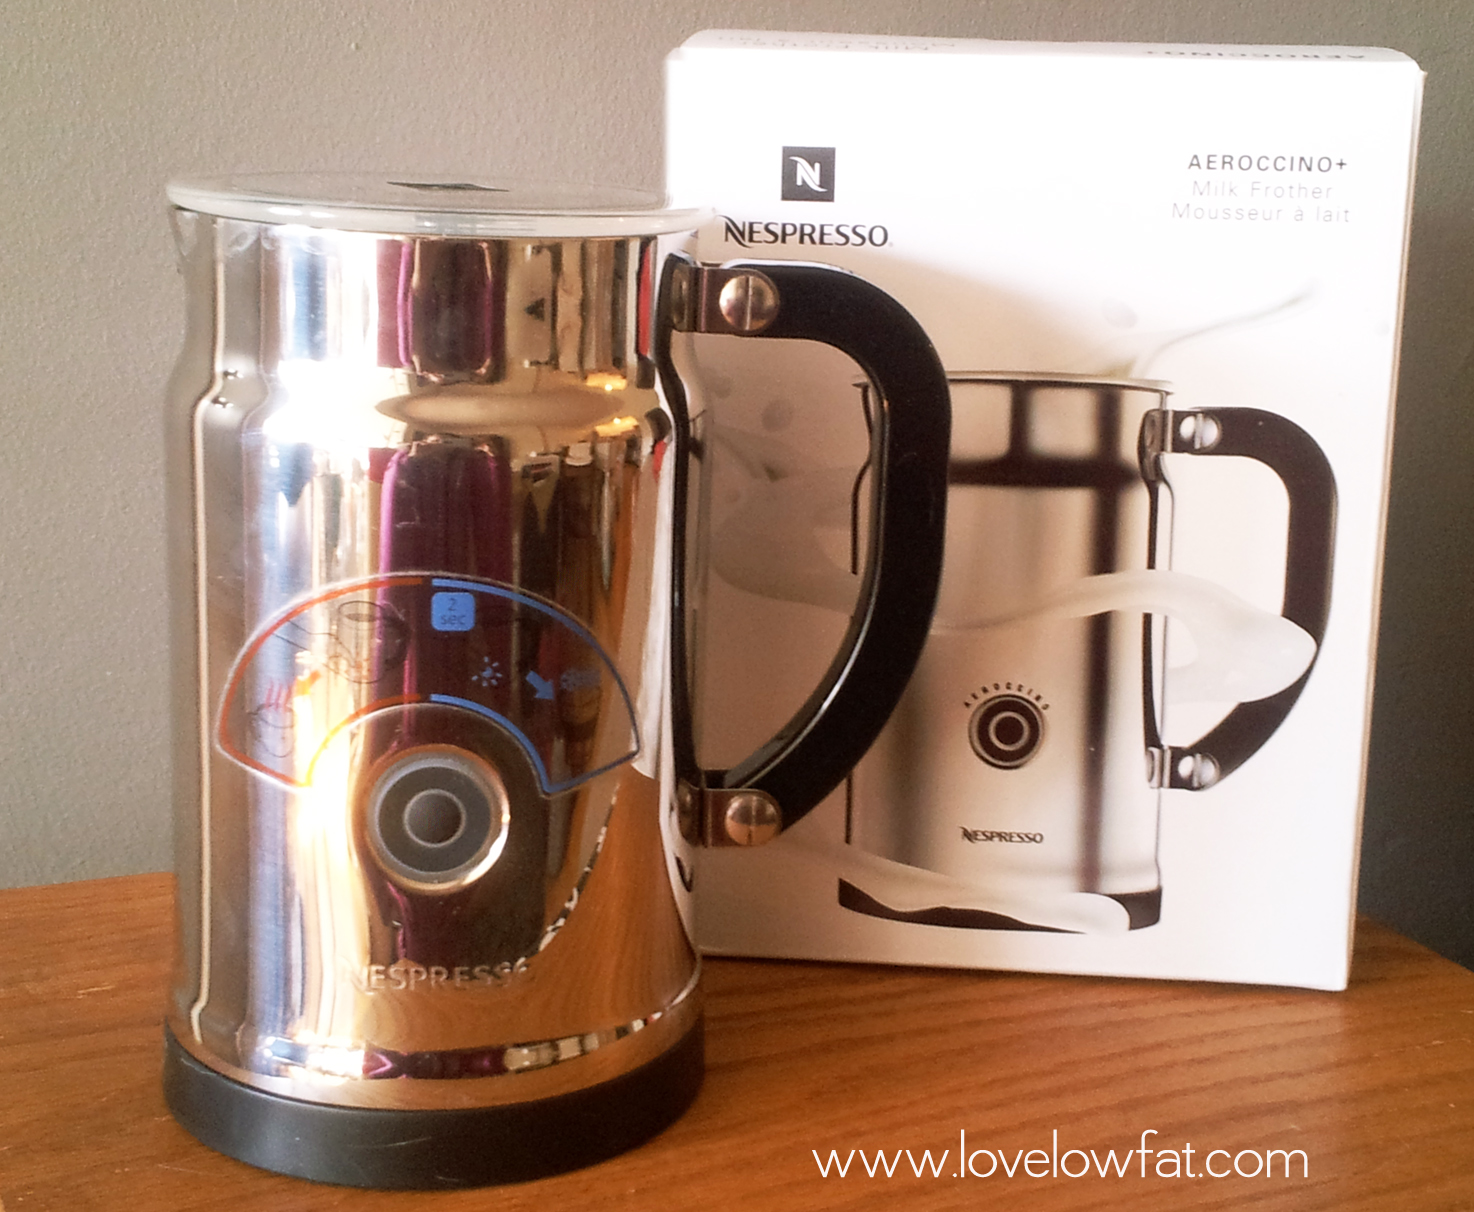 Review of Nespresso Aeroccino 4 Milk Frother for hot and cold